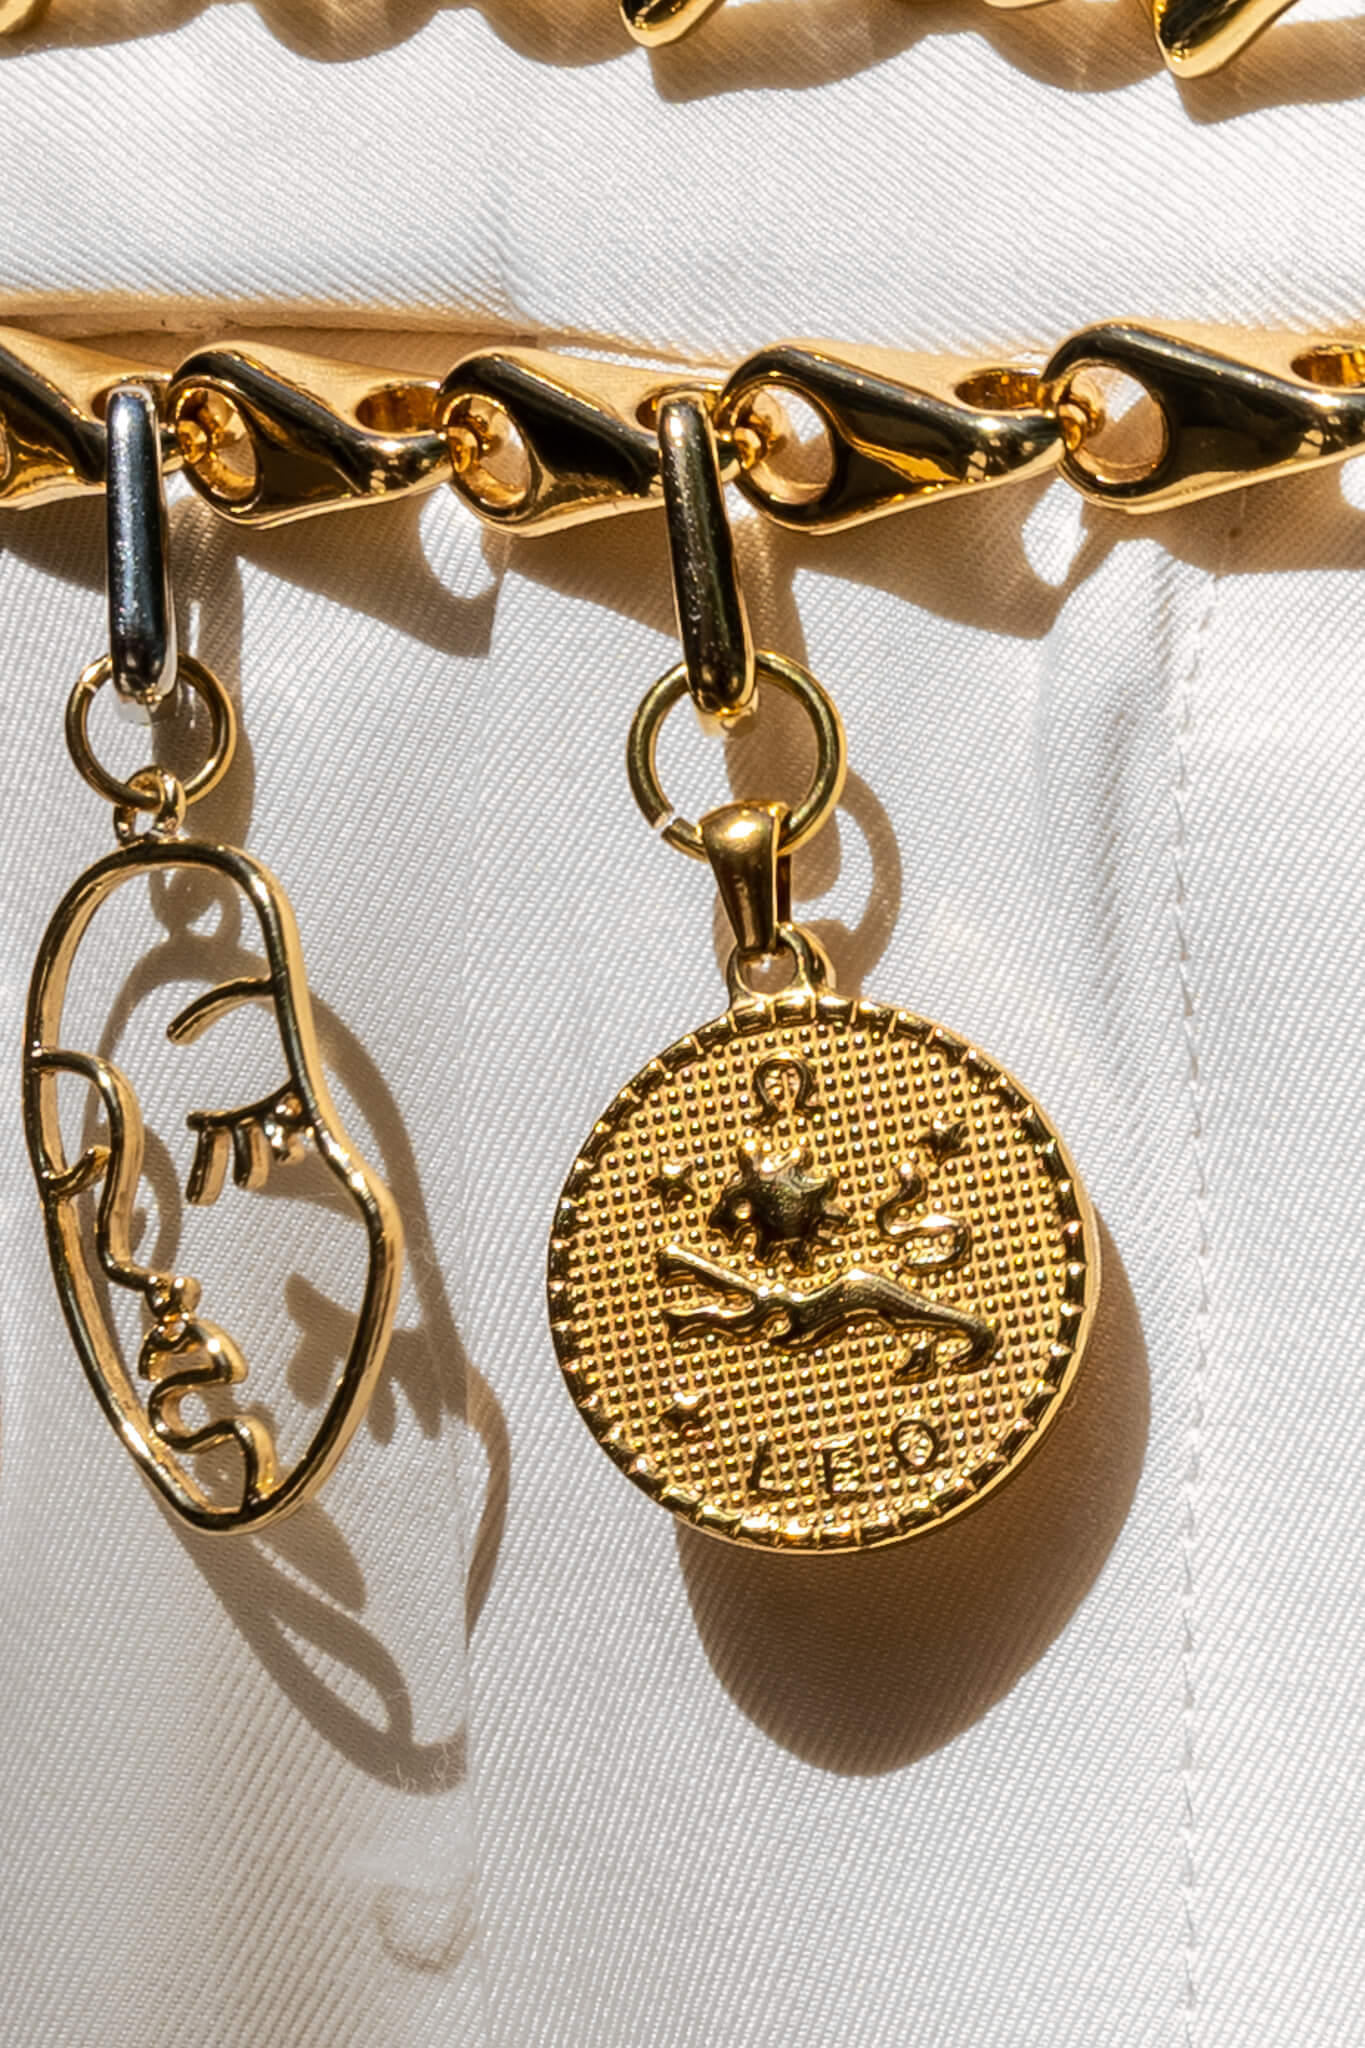 Zodiac gold coin charm clipped on a chain belt